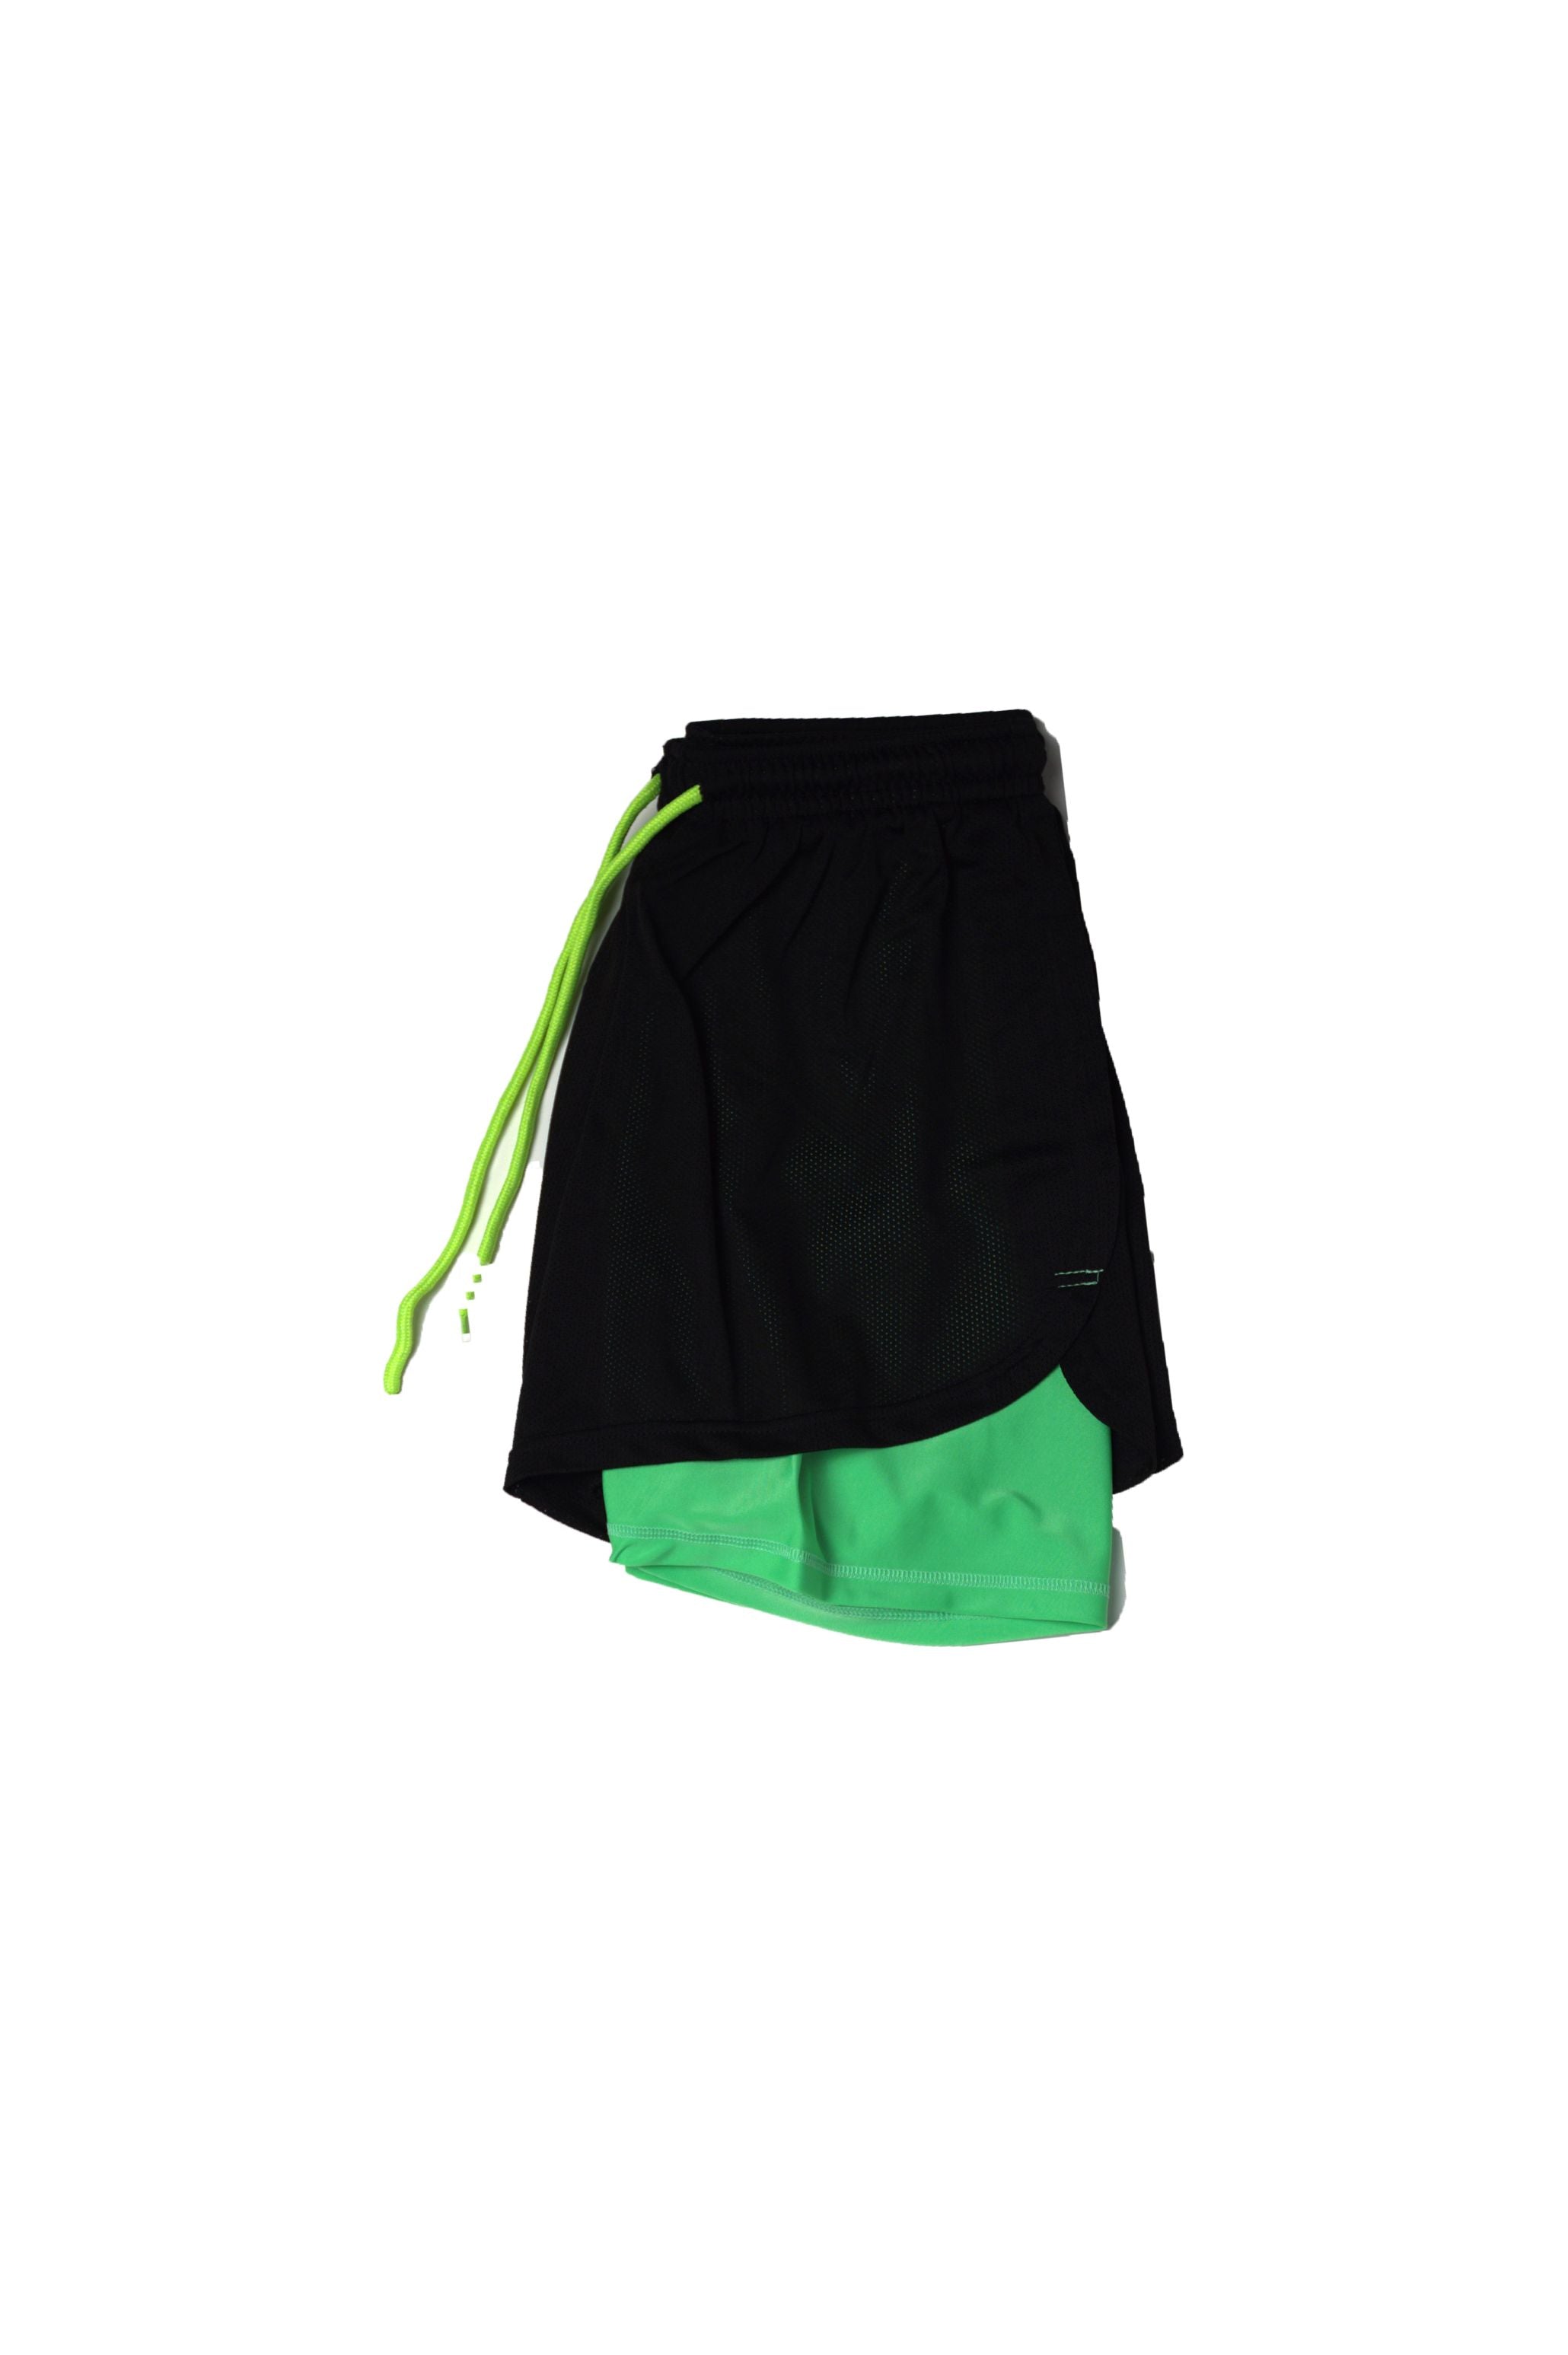 WOMEN FITNESS SHORTS BLACK AND GREEN